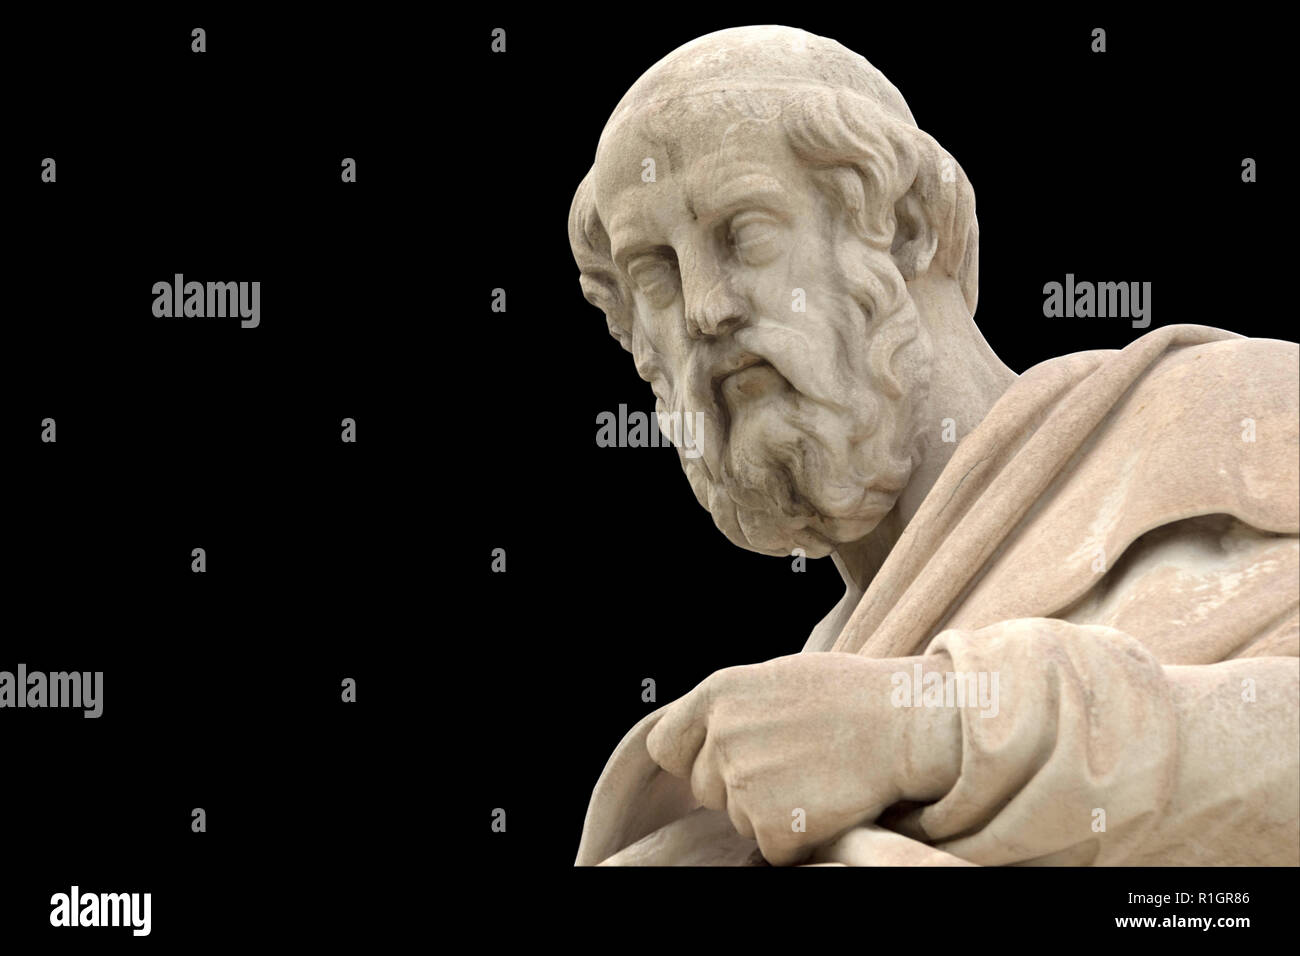 classic statue of Plato from side close up Stock Photo